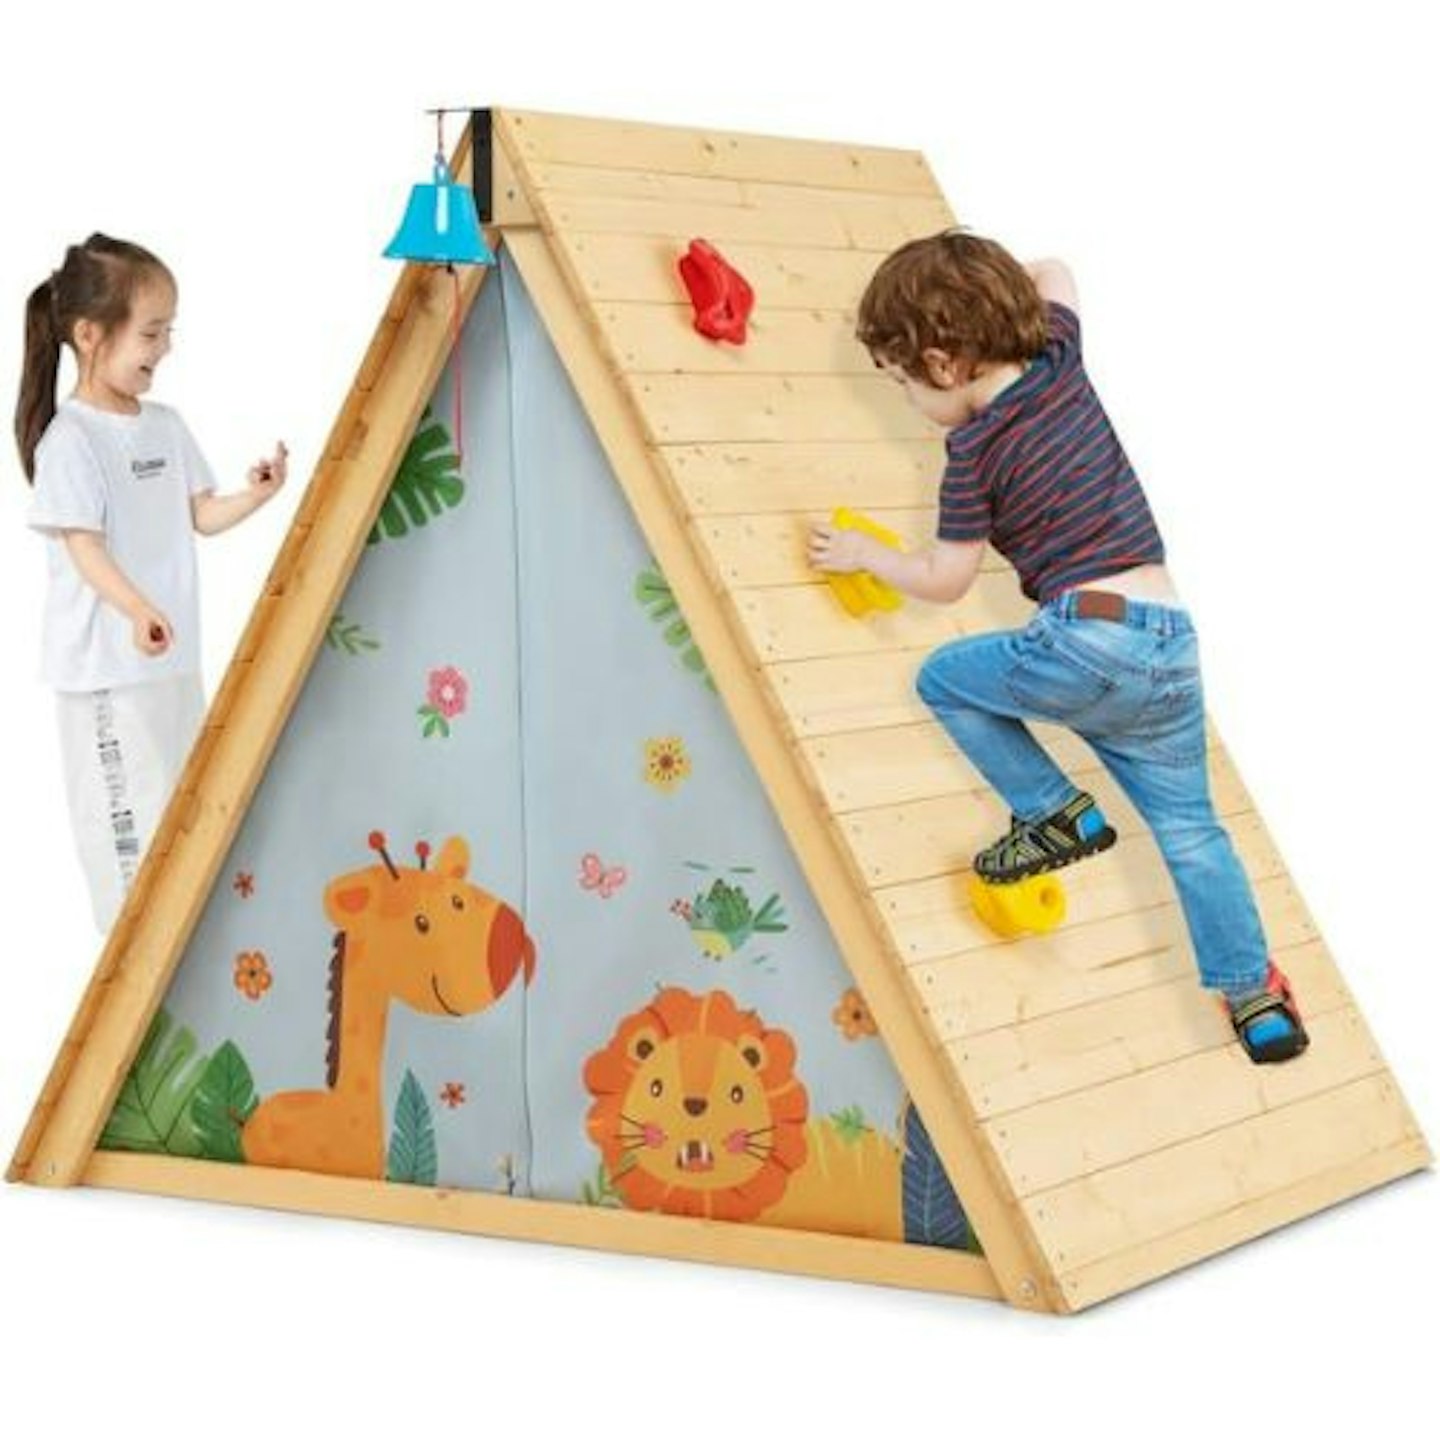 Best indoor climbers for toddlers COSTWAY Kids Wooden Playhouse